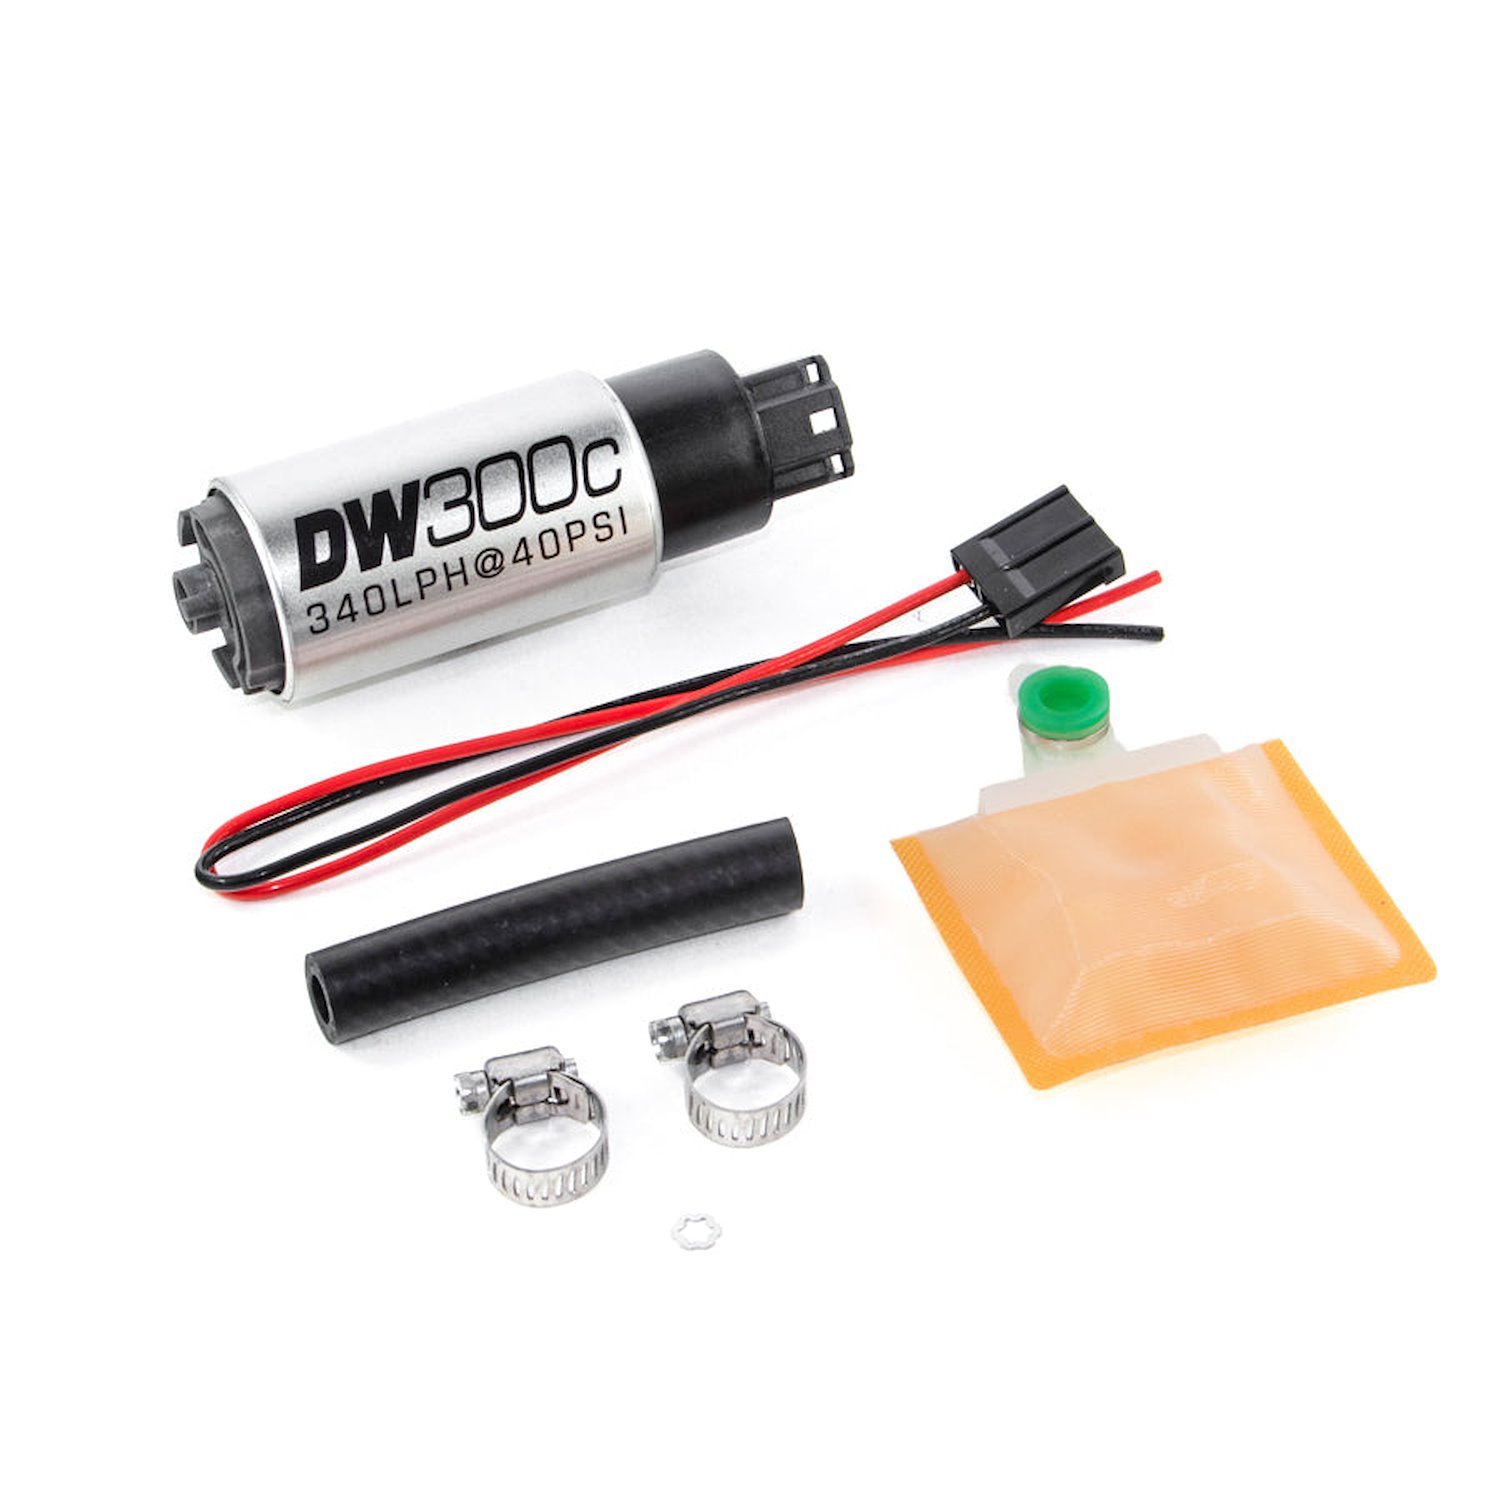 93071000 DW300C series 340lph compact fuel pump without mounting clips w/ Universal Install Kit.